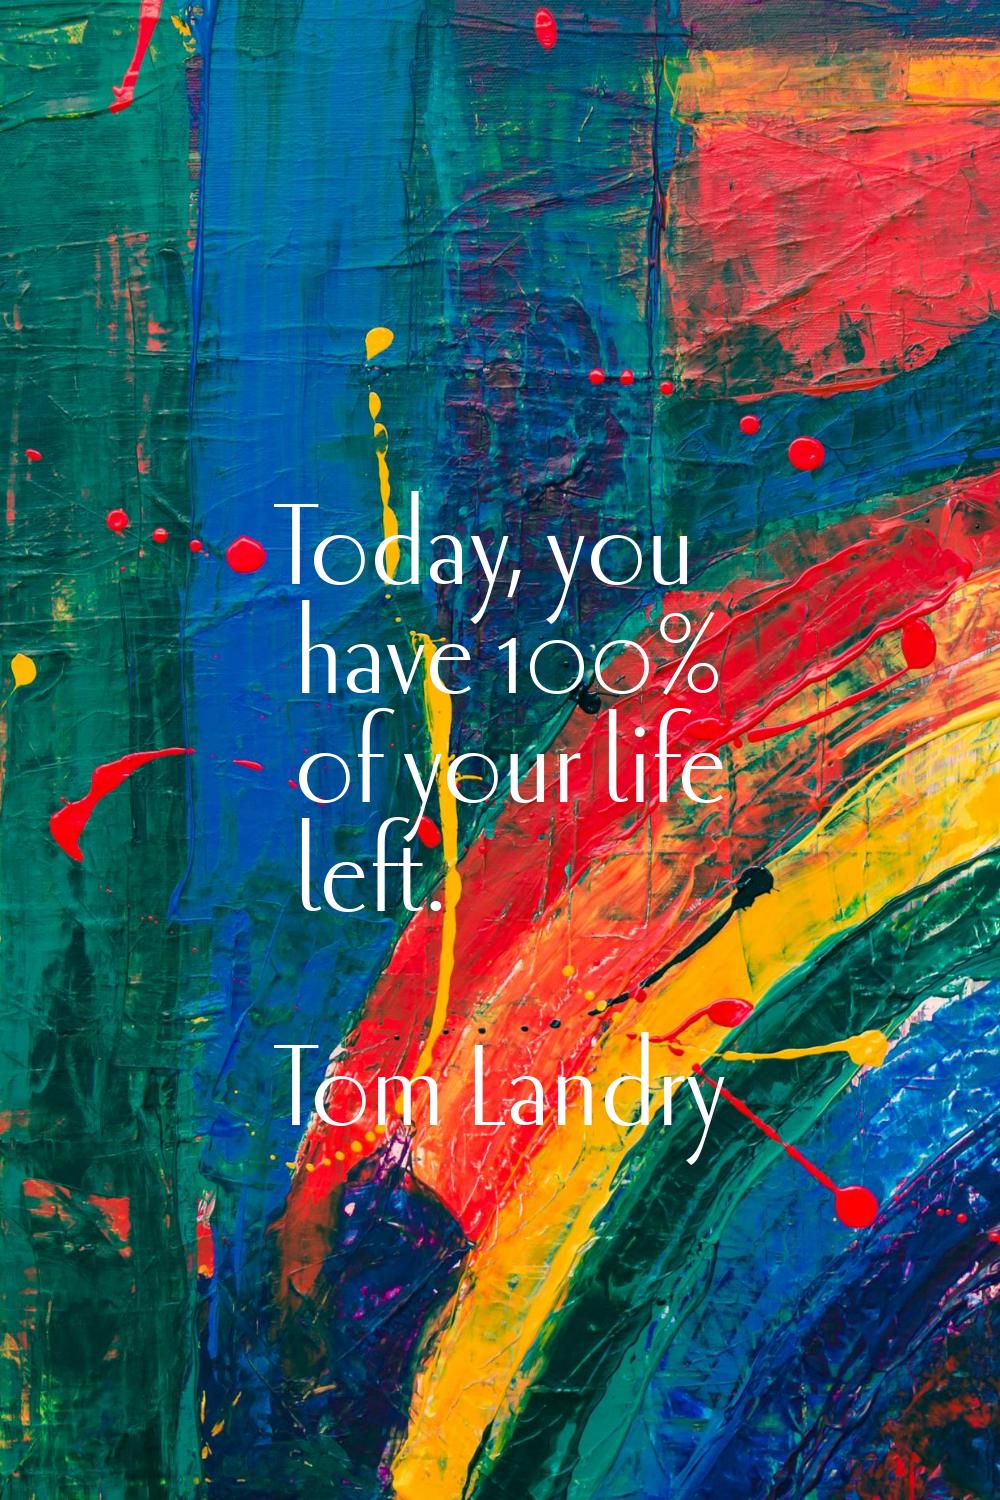 Today, you have 100% of your life left.